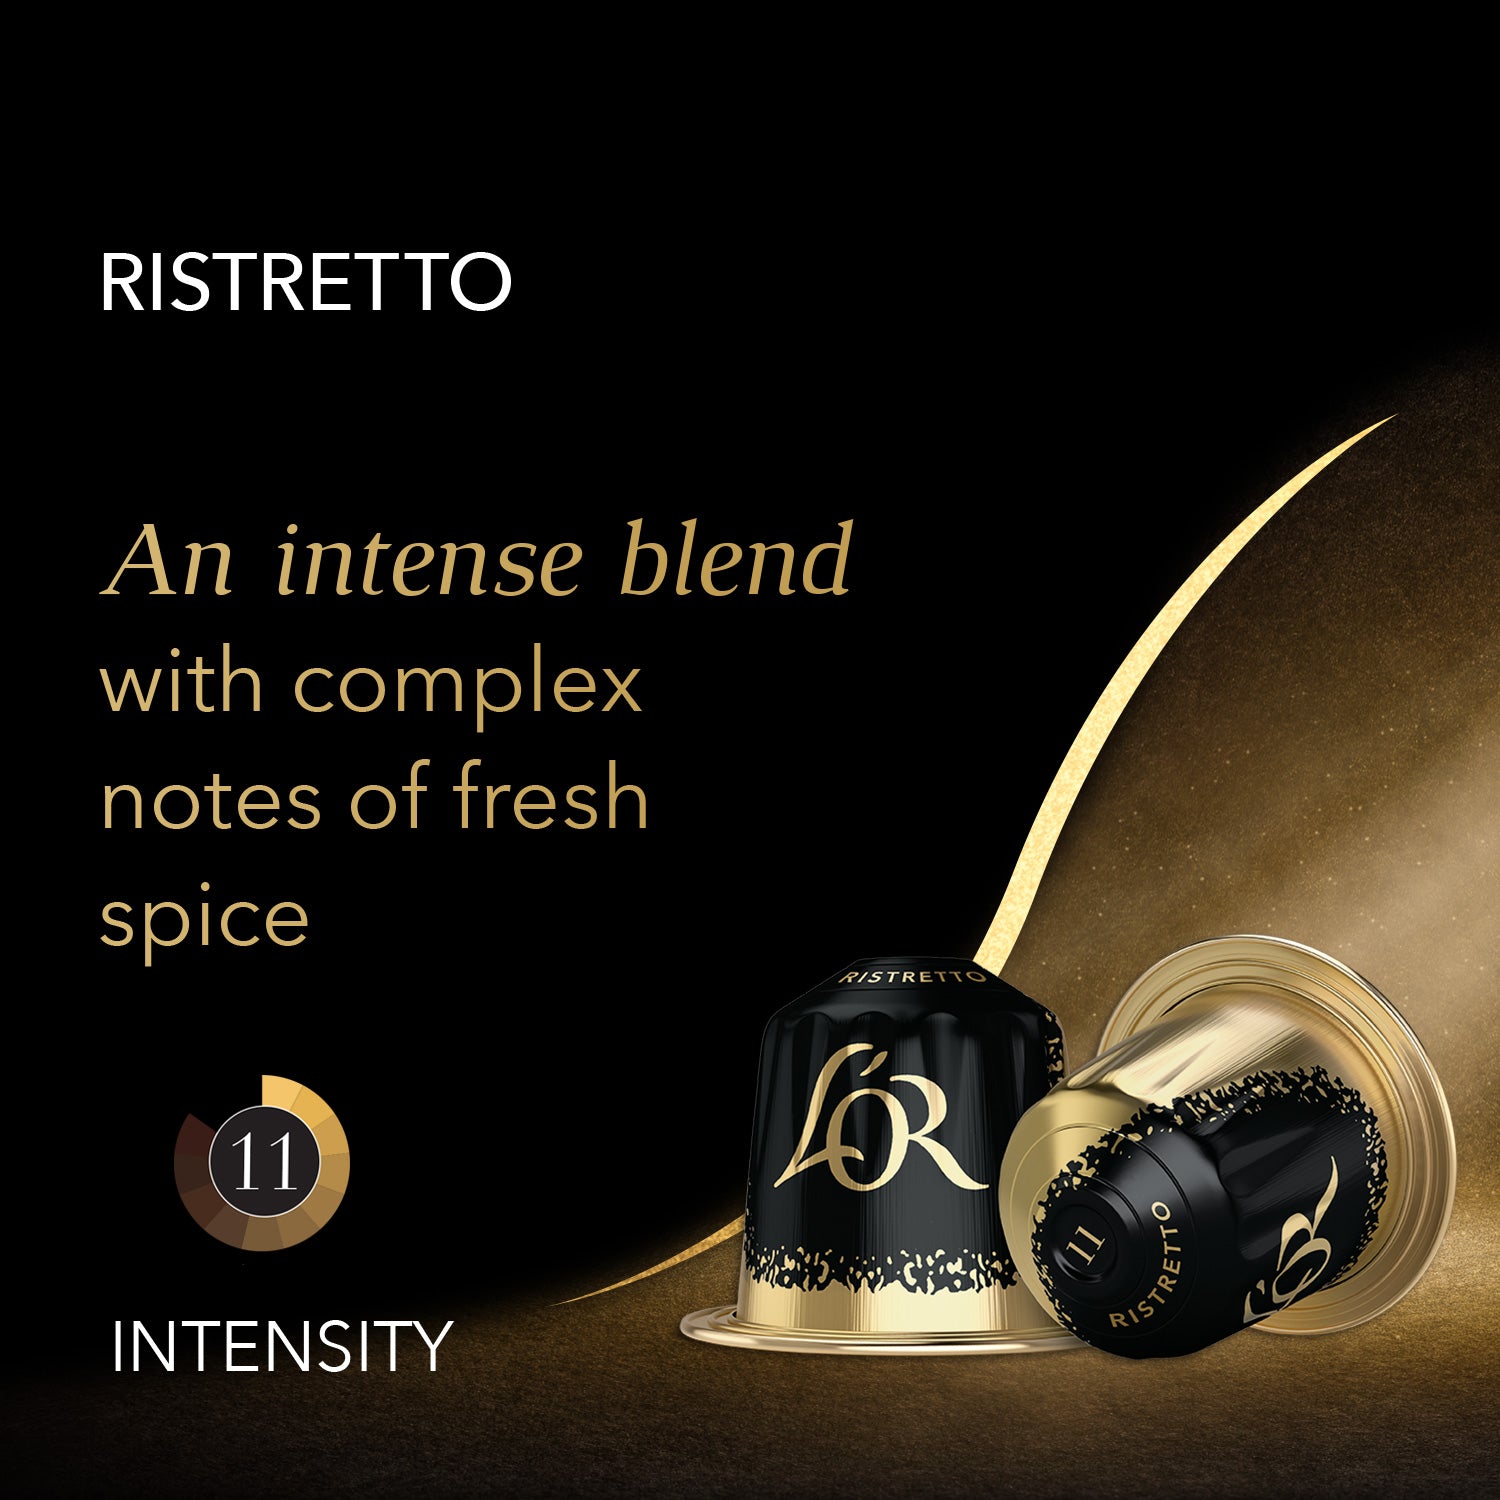 An intense blend with complex notes of fresh spice.